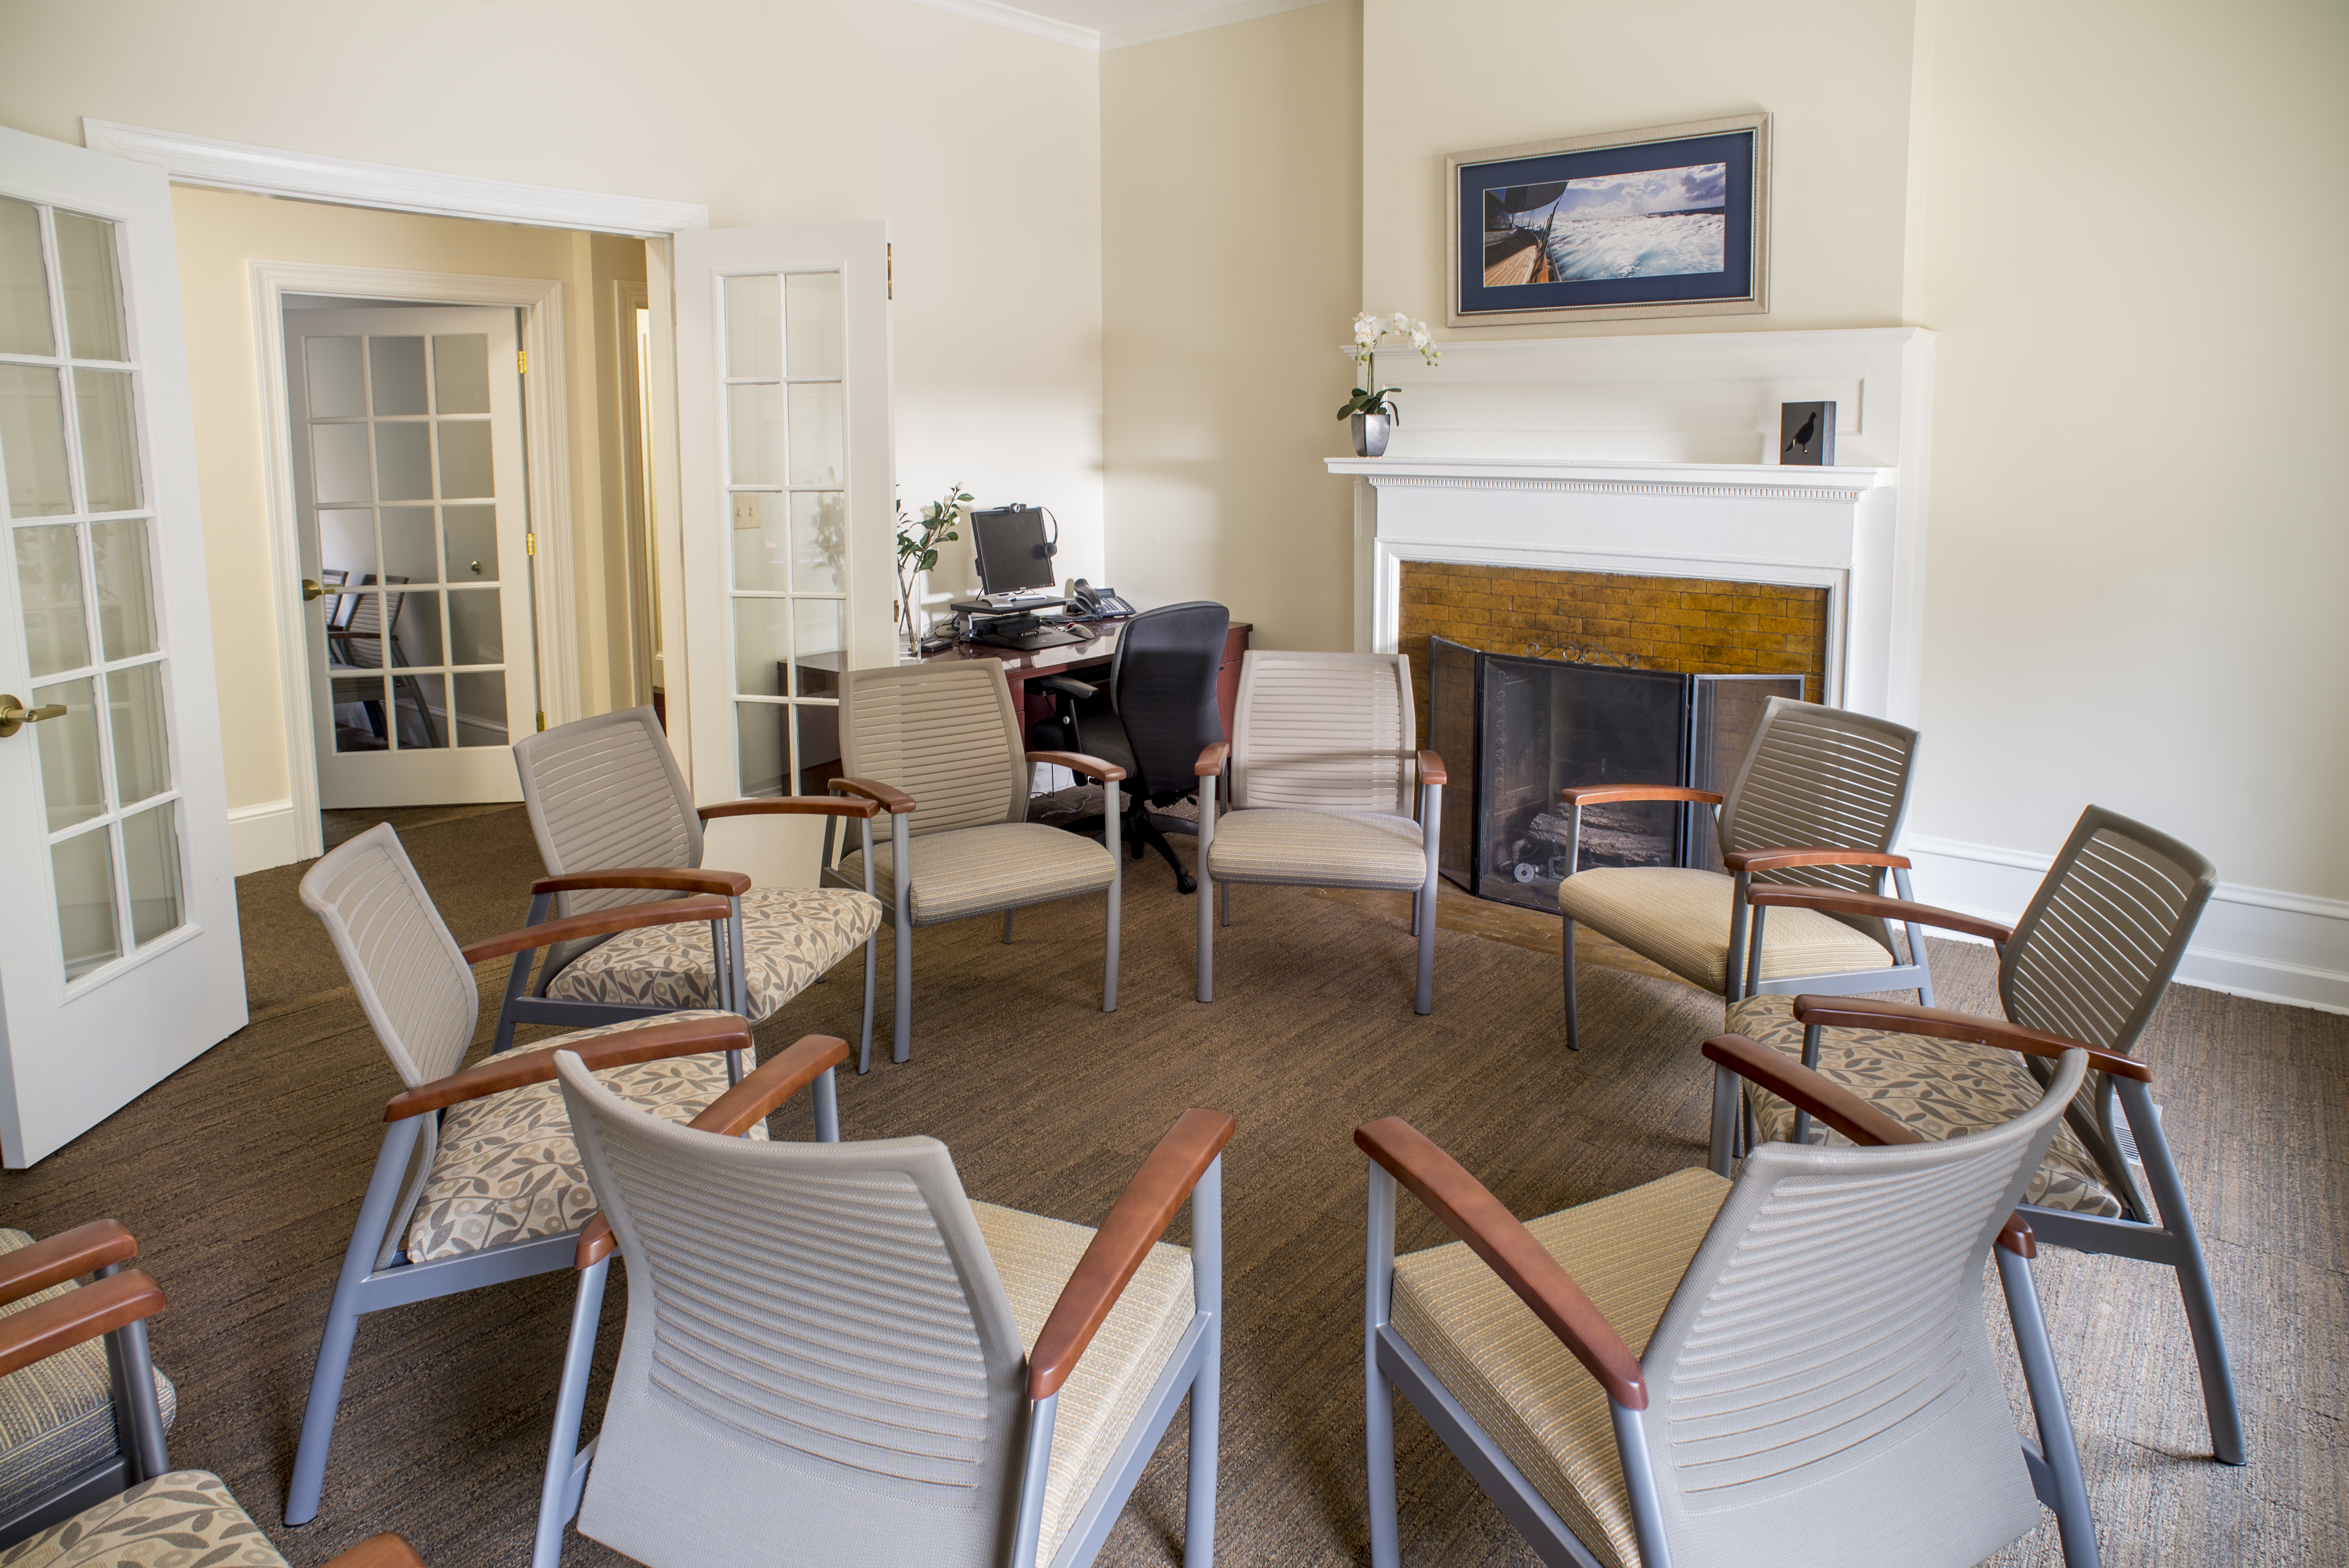 A view inside the Hazelden Betty Ford group therapy room